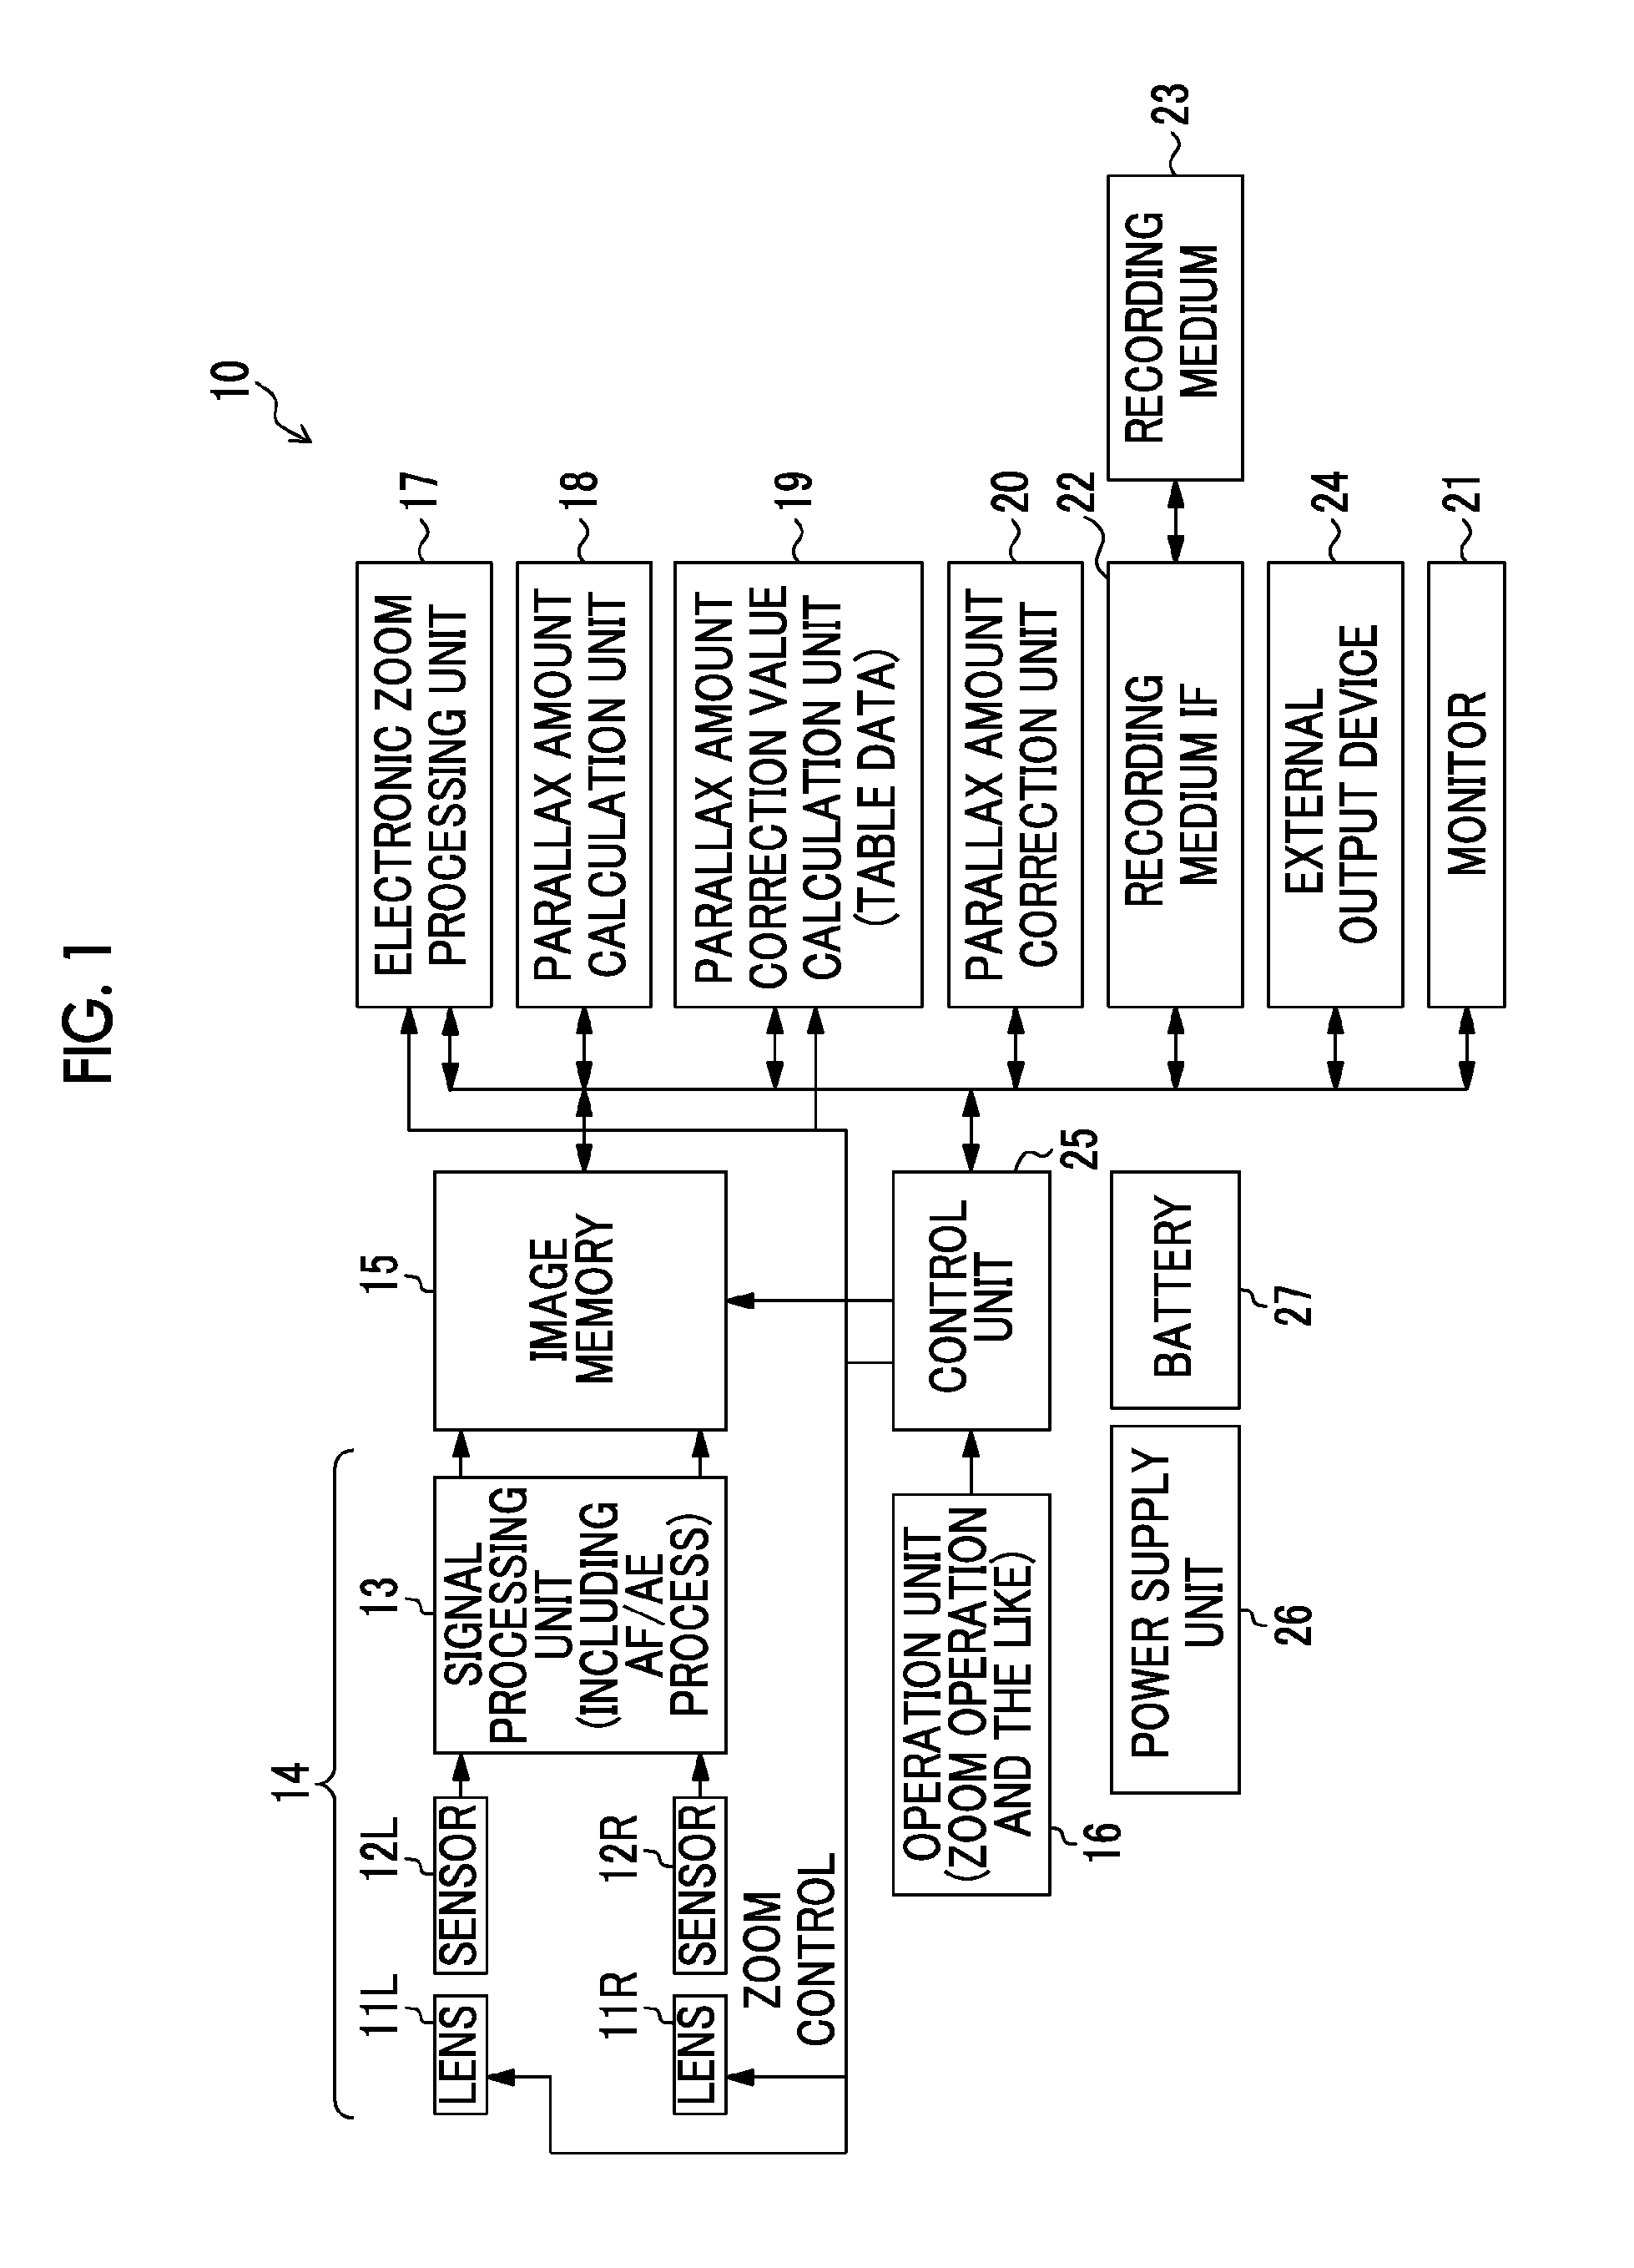 Image processing device, imaging capturing device, and method for processing image